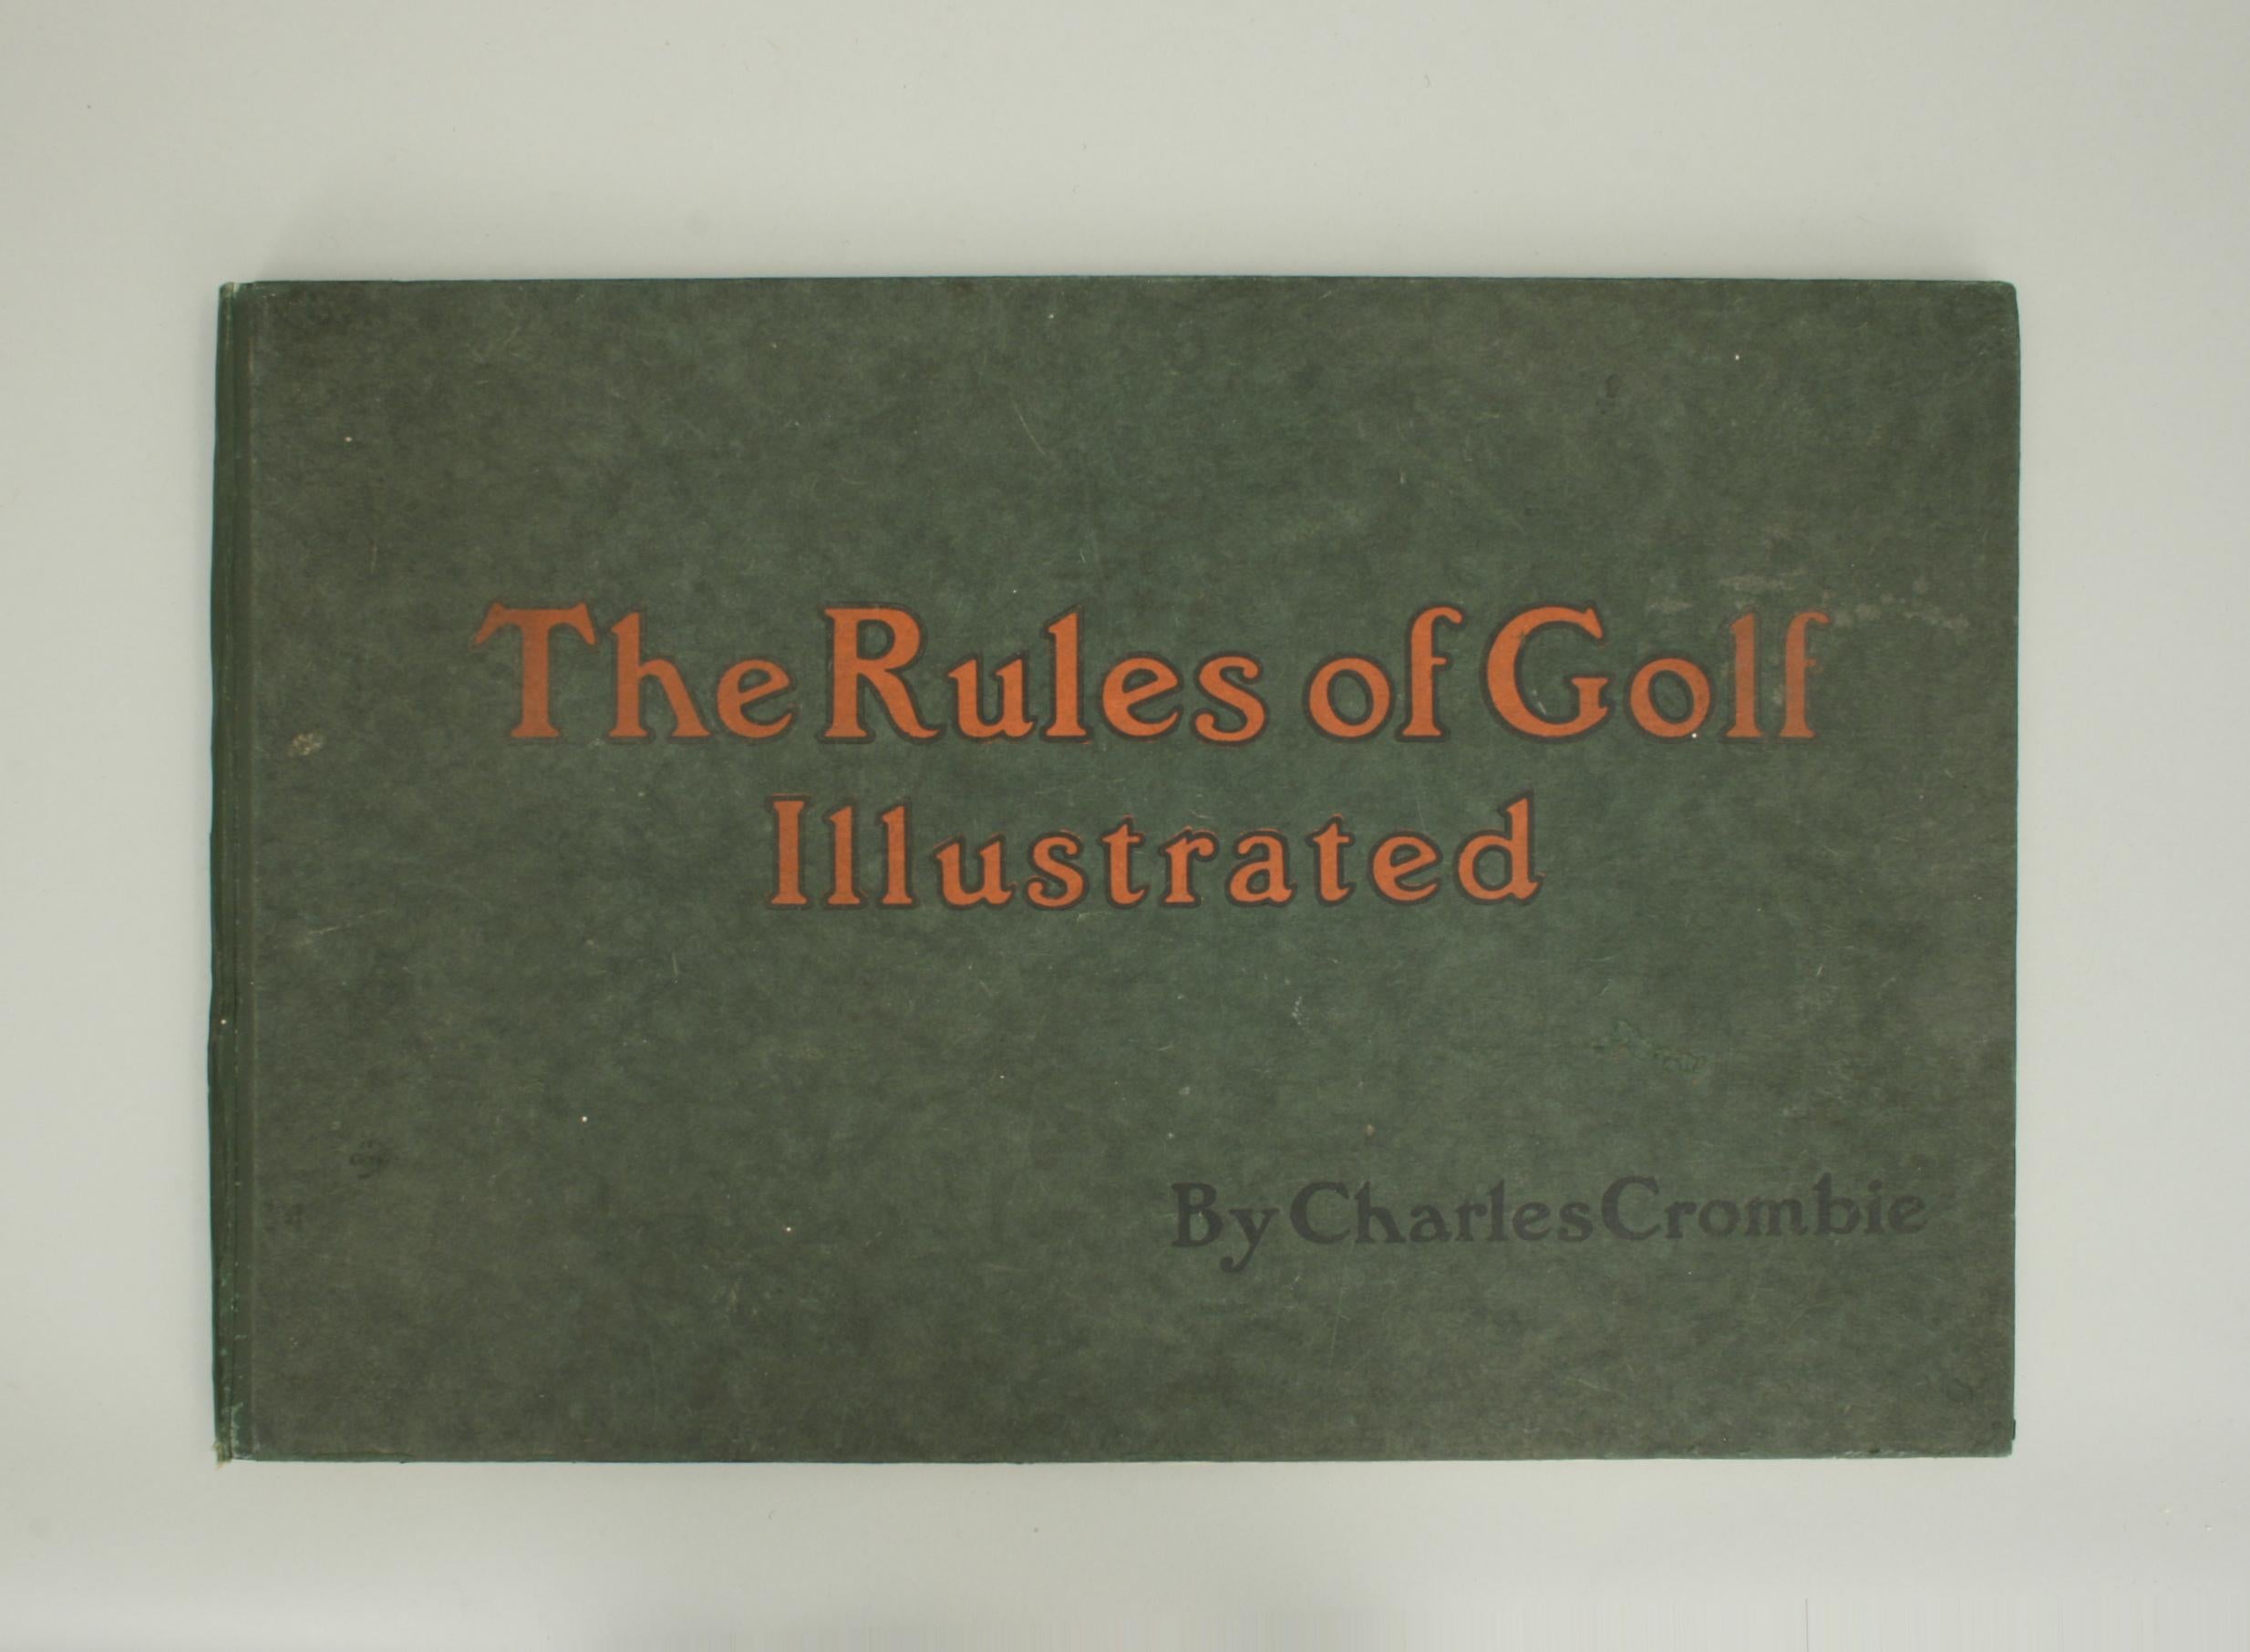 English Antique Golf Book, Rules of Golf Illustrated by Charles Crombie, Perrier